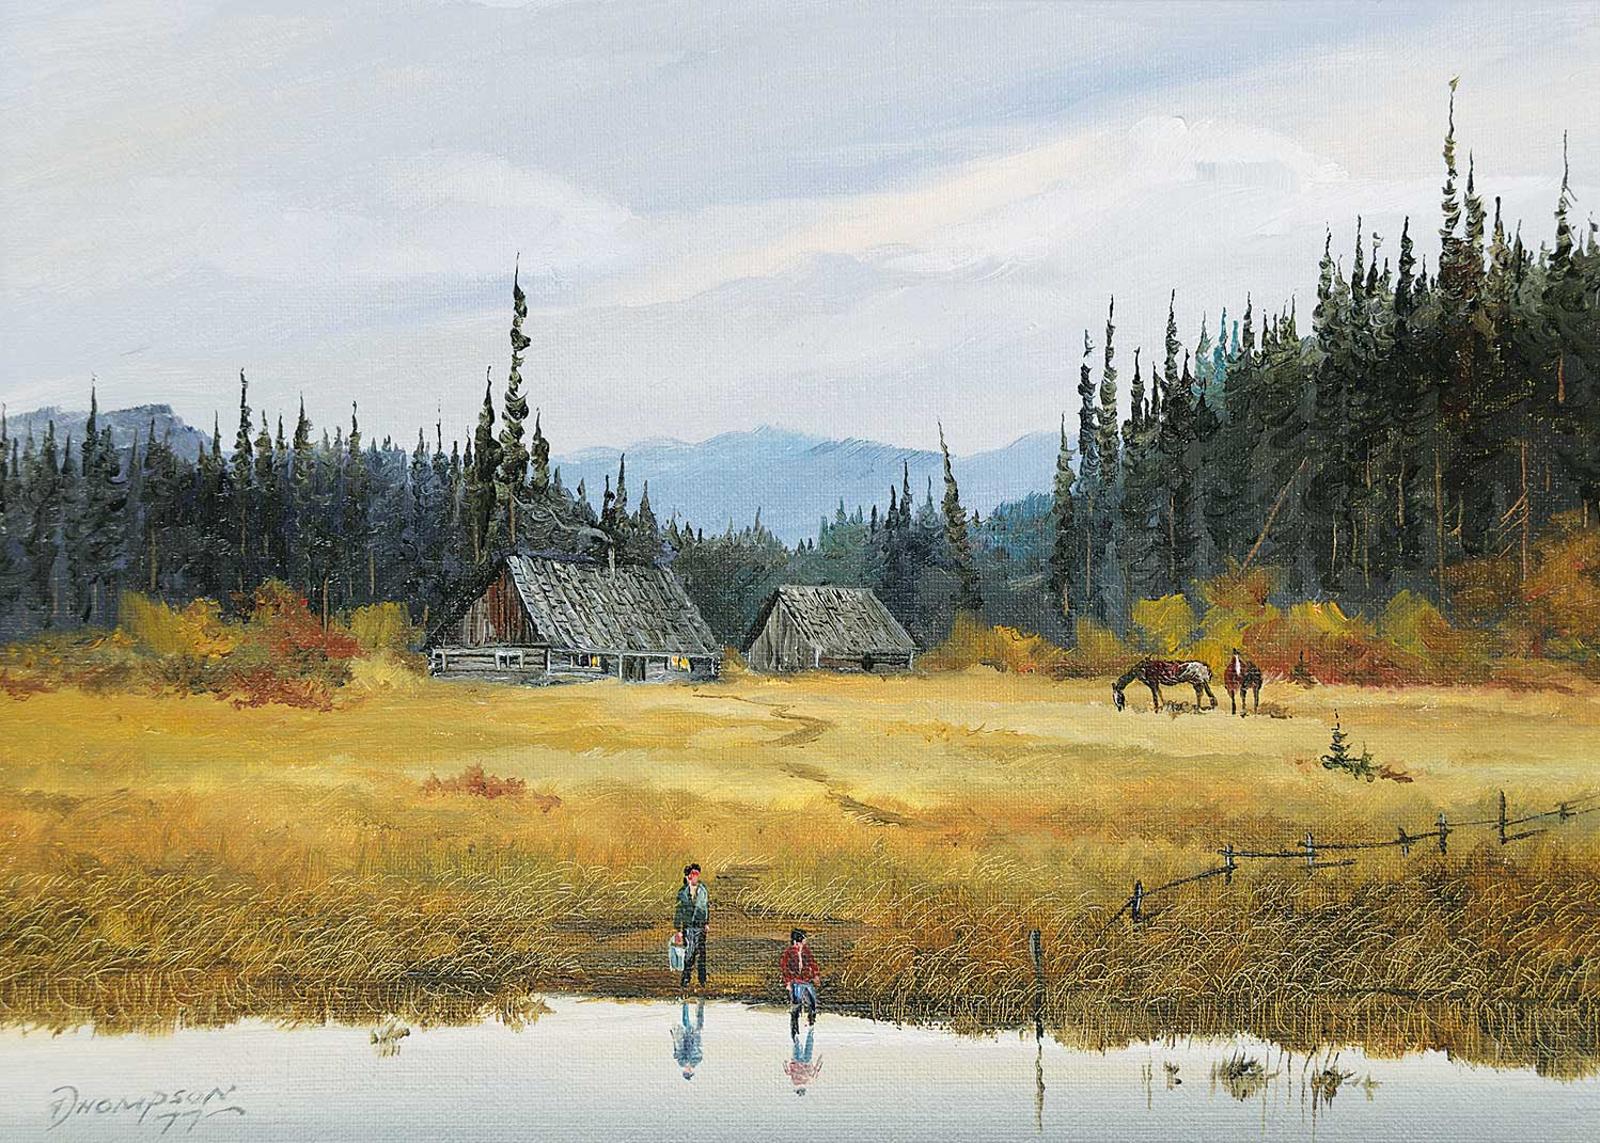 Allan Robert Thompson (1949) - Untitled - Daily Chores at the Cabin